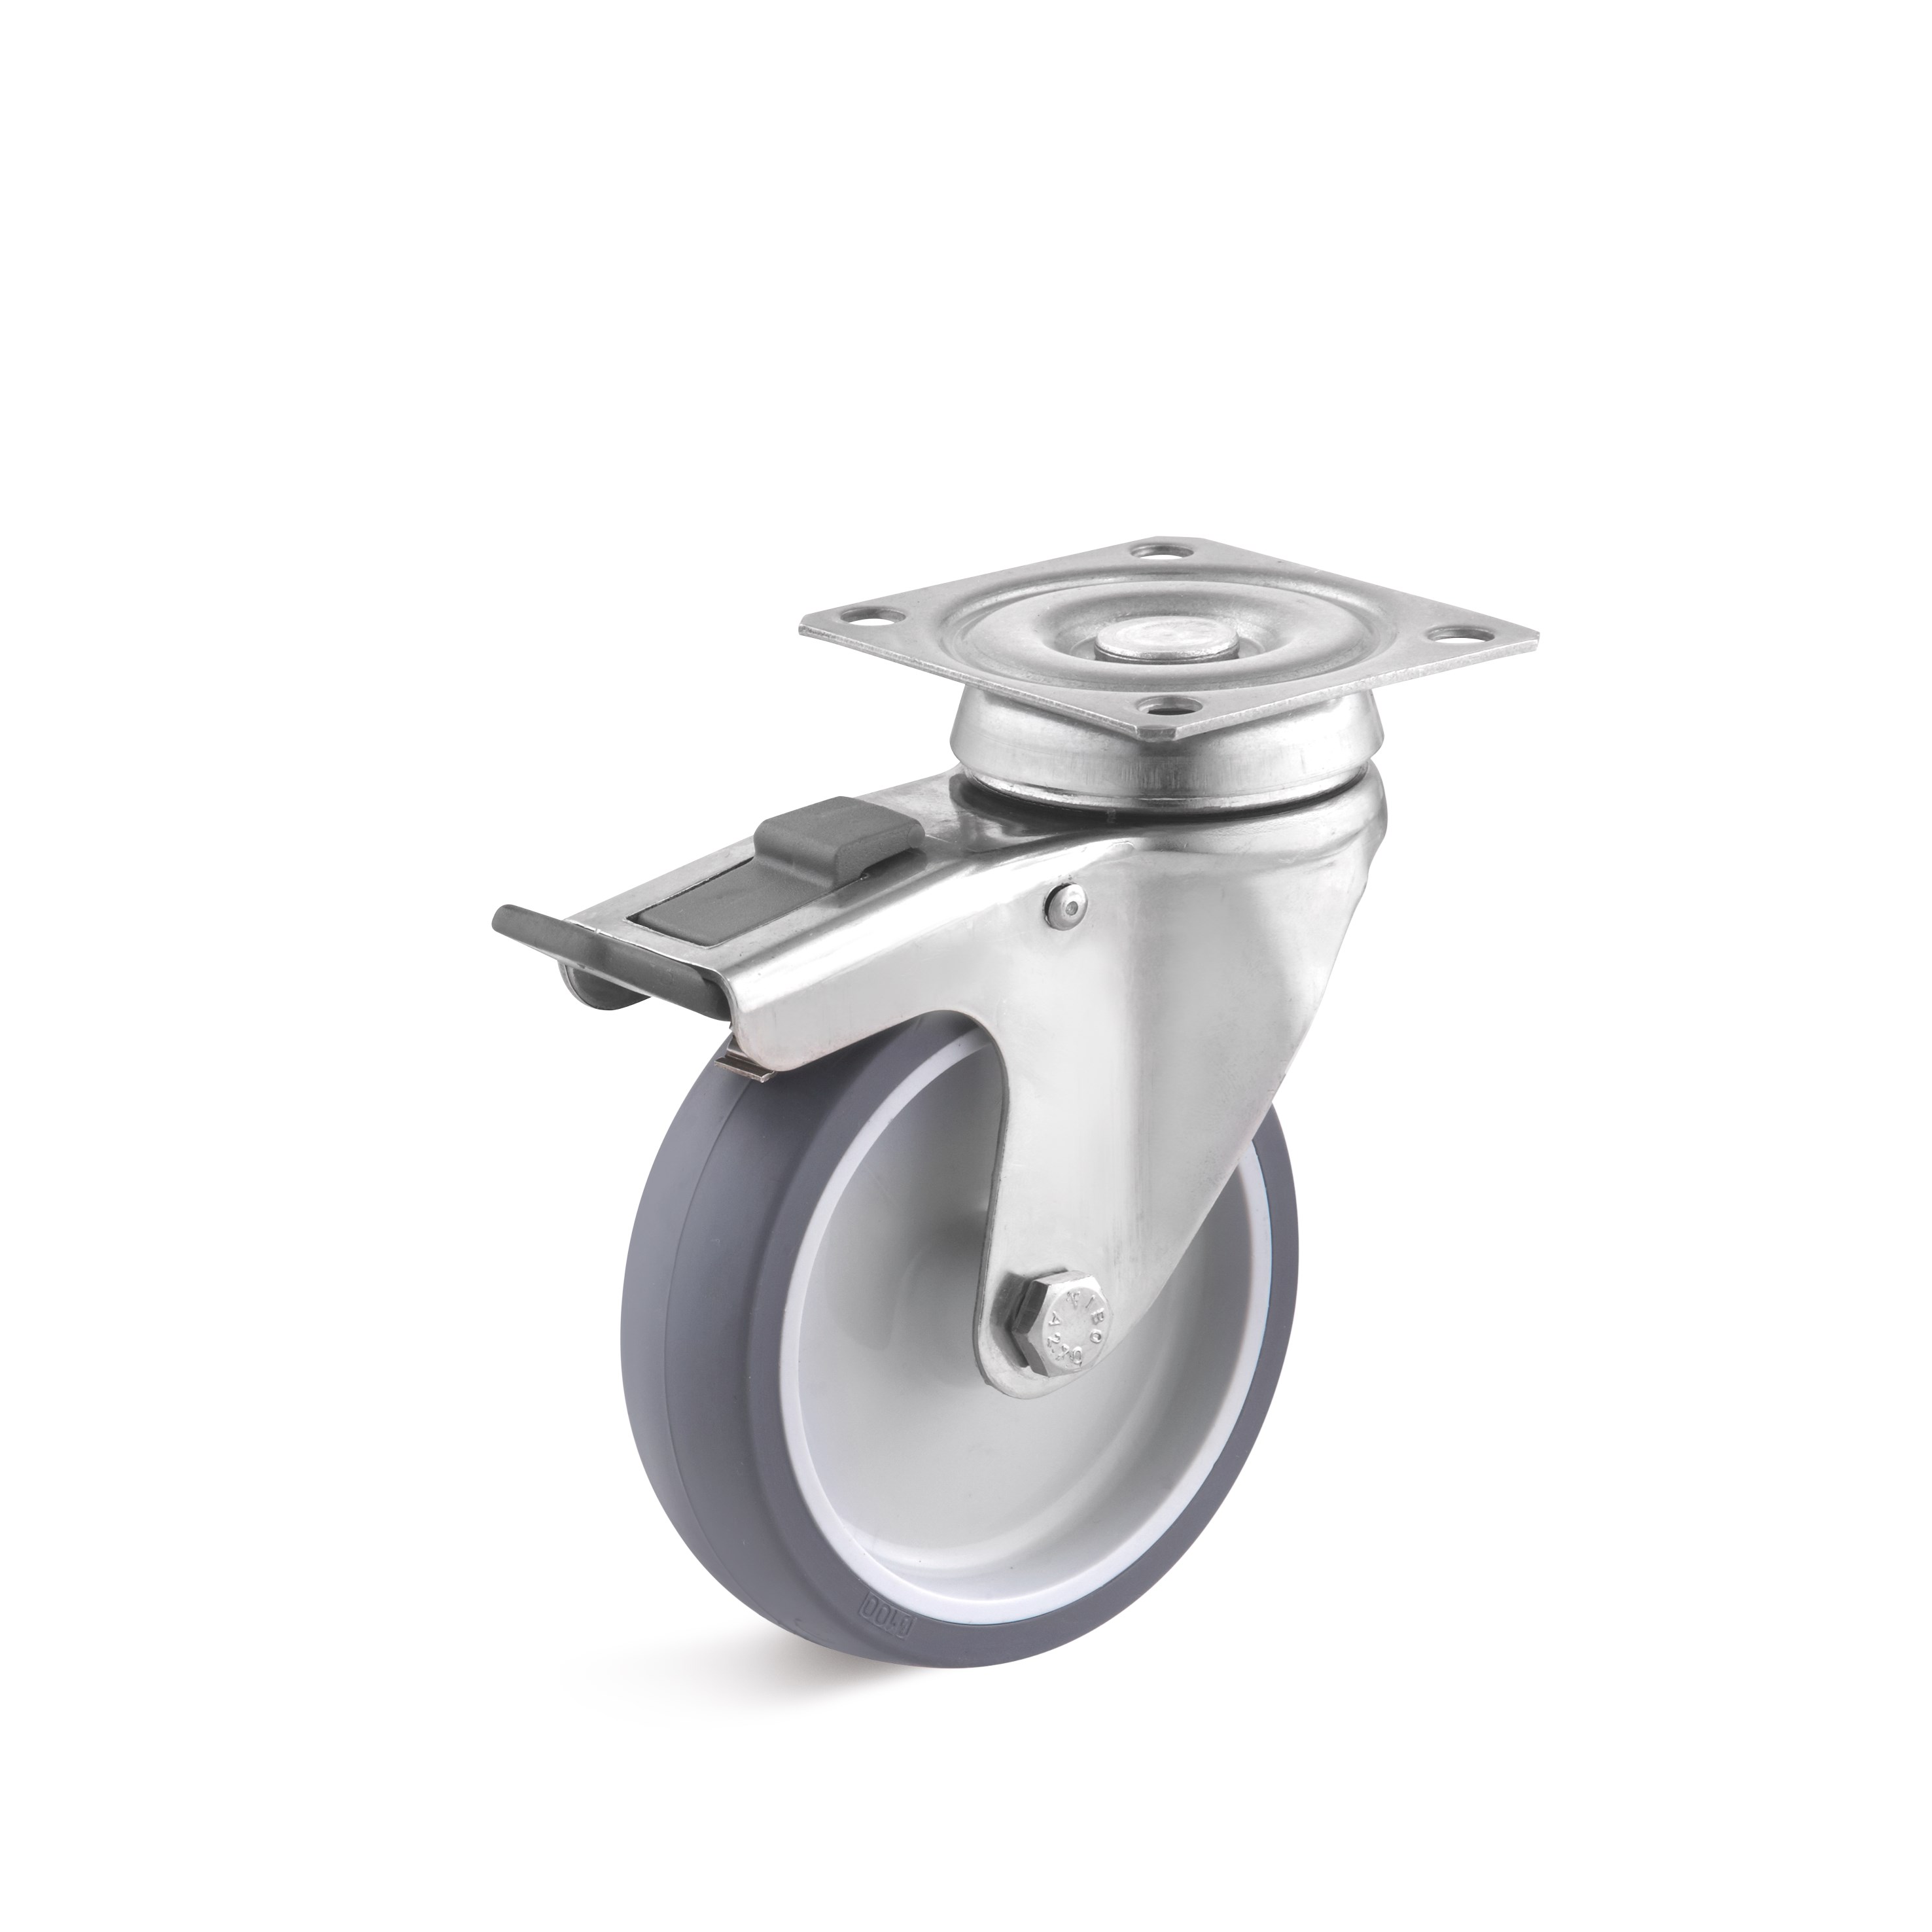 Stainless steel swivel castor with double stop and thermoplastic wheel L-AV-TPGK-050-G-3-DSN